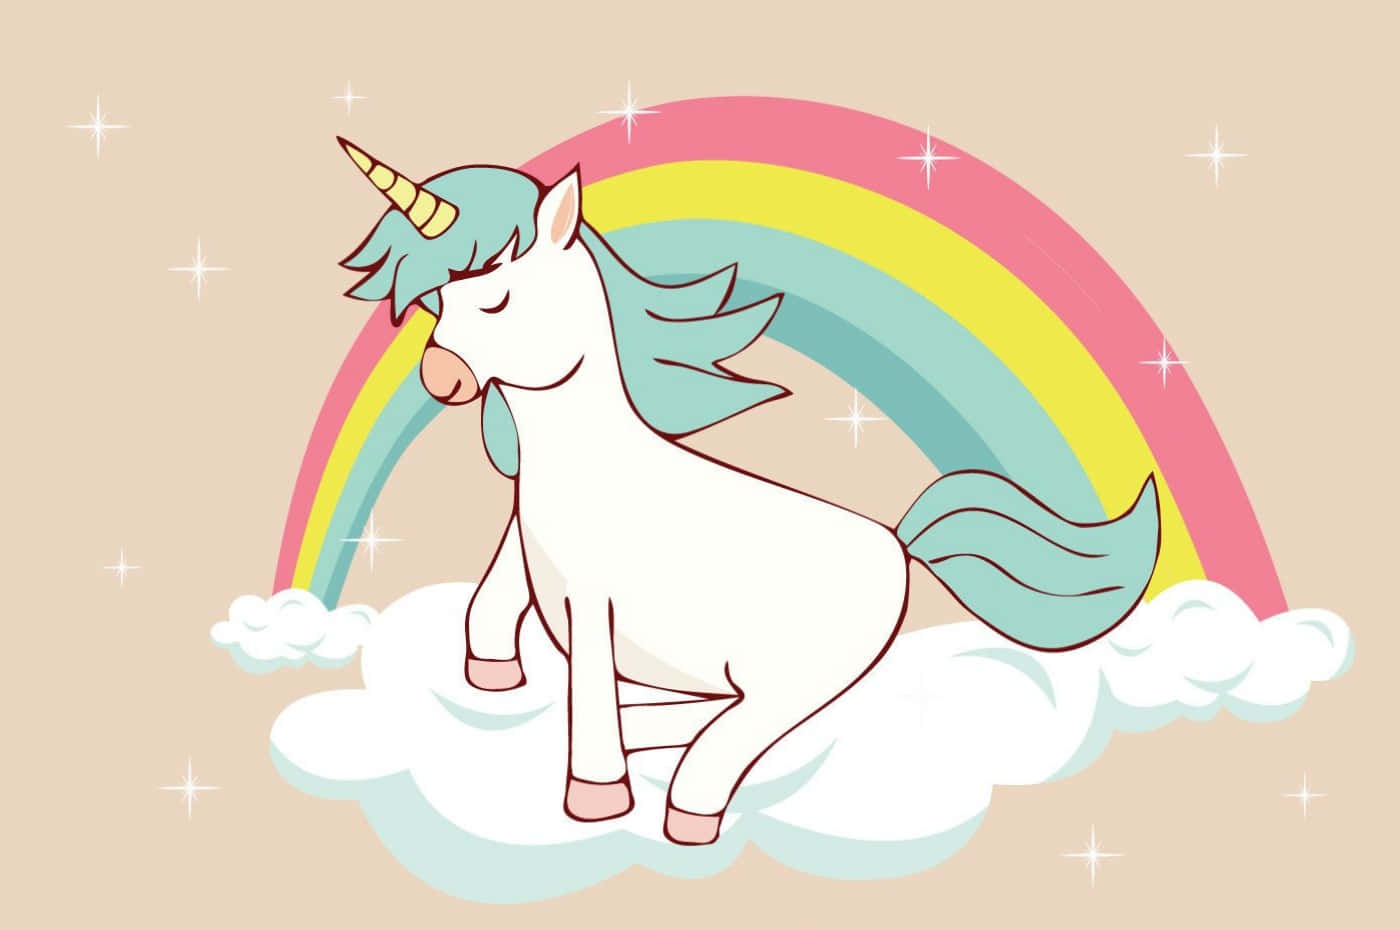 Magic and sparkles abound in this colorful Rainbow Unicorn